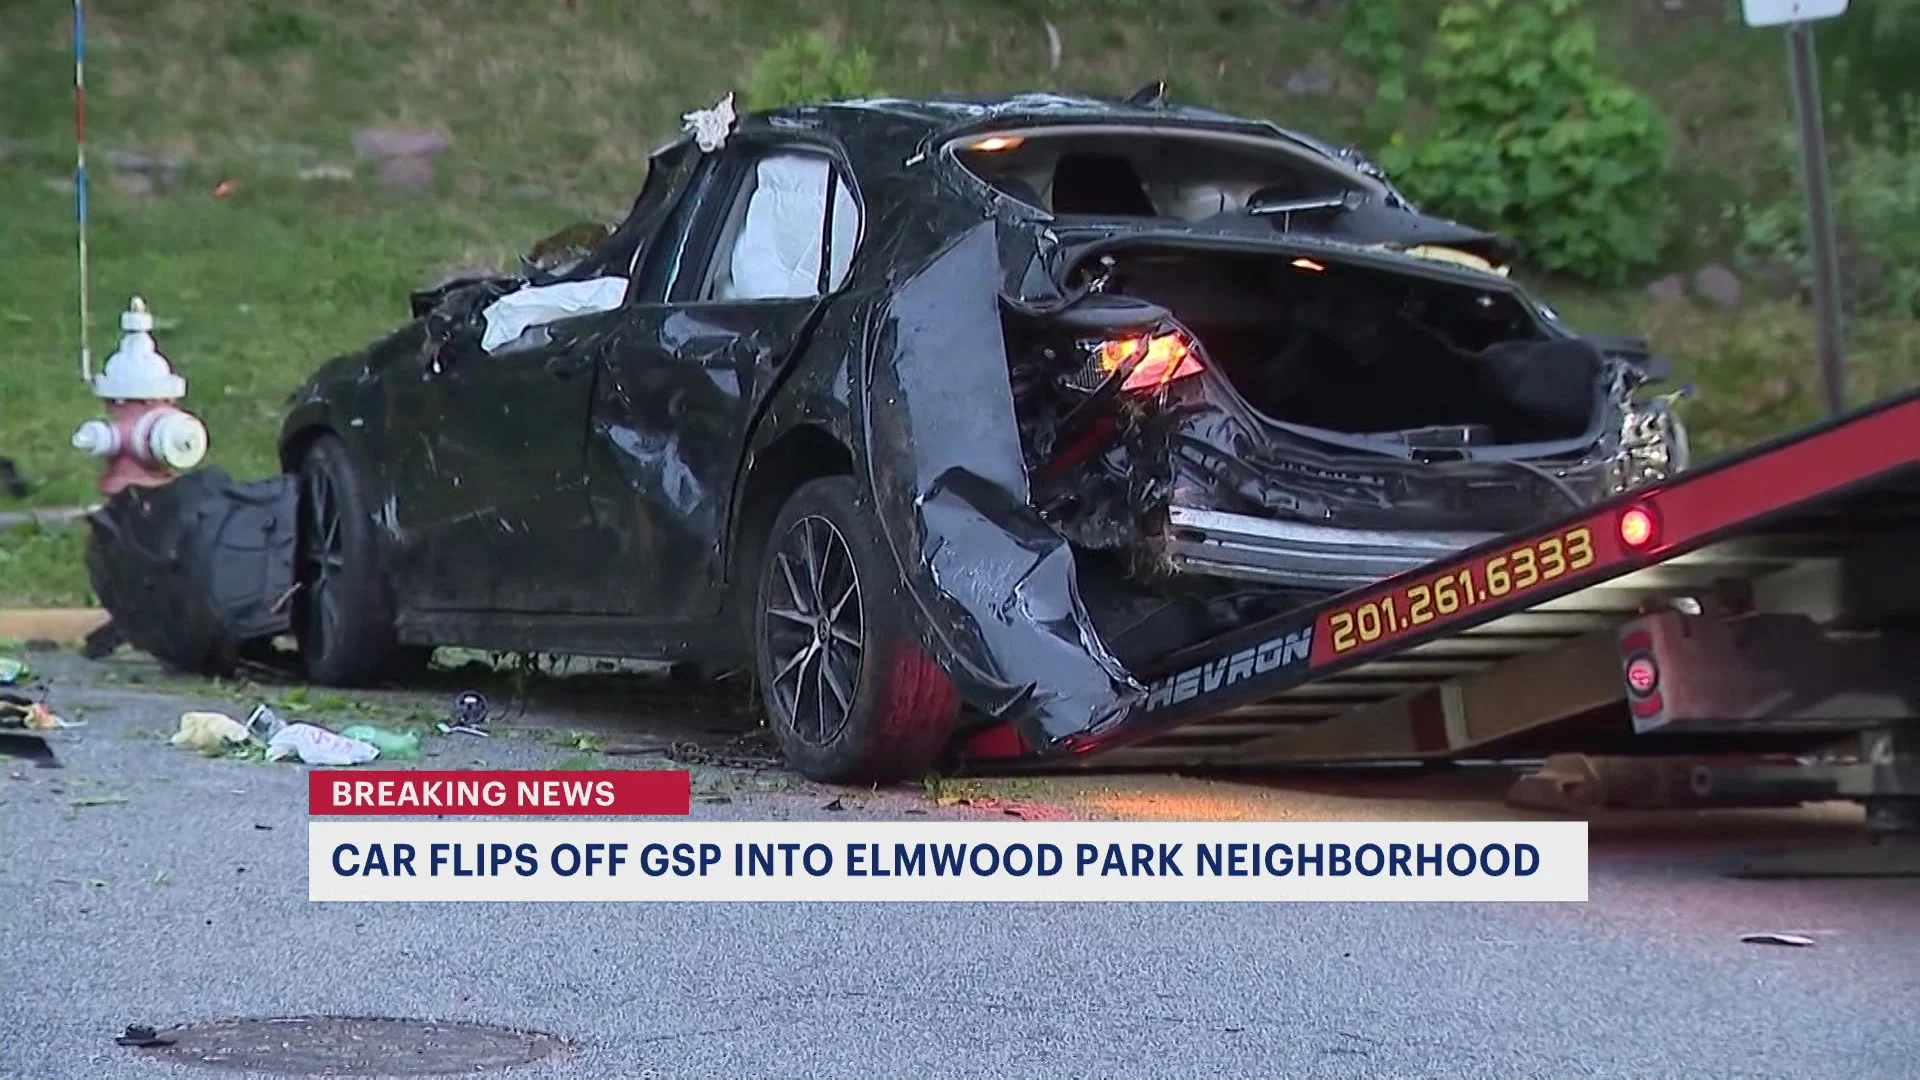 Car flips off Garden State Parkway in Elmwood Park, narrowly misses hitting a house; 1 seriously injured